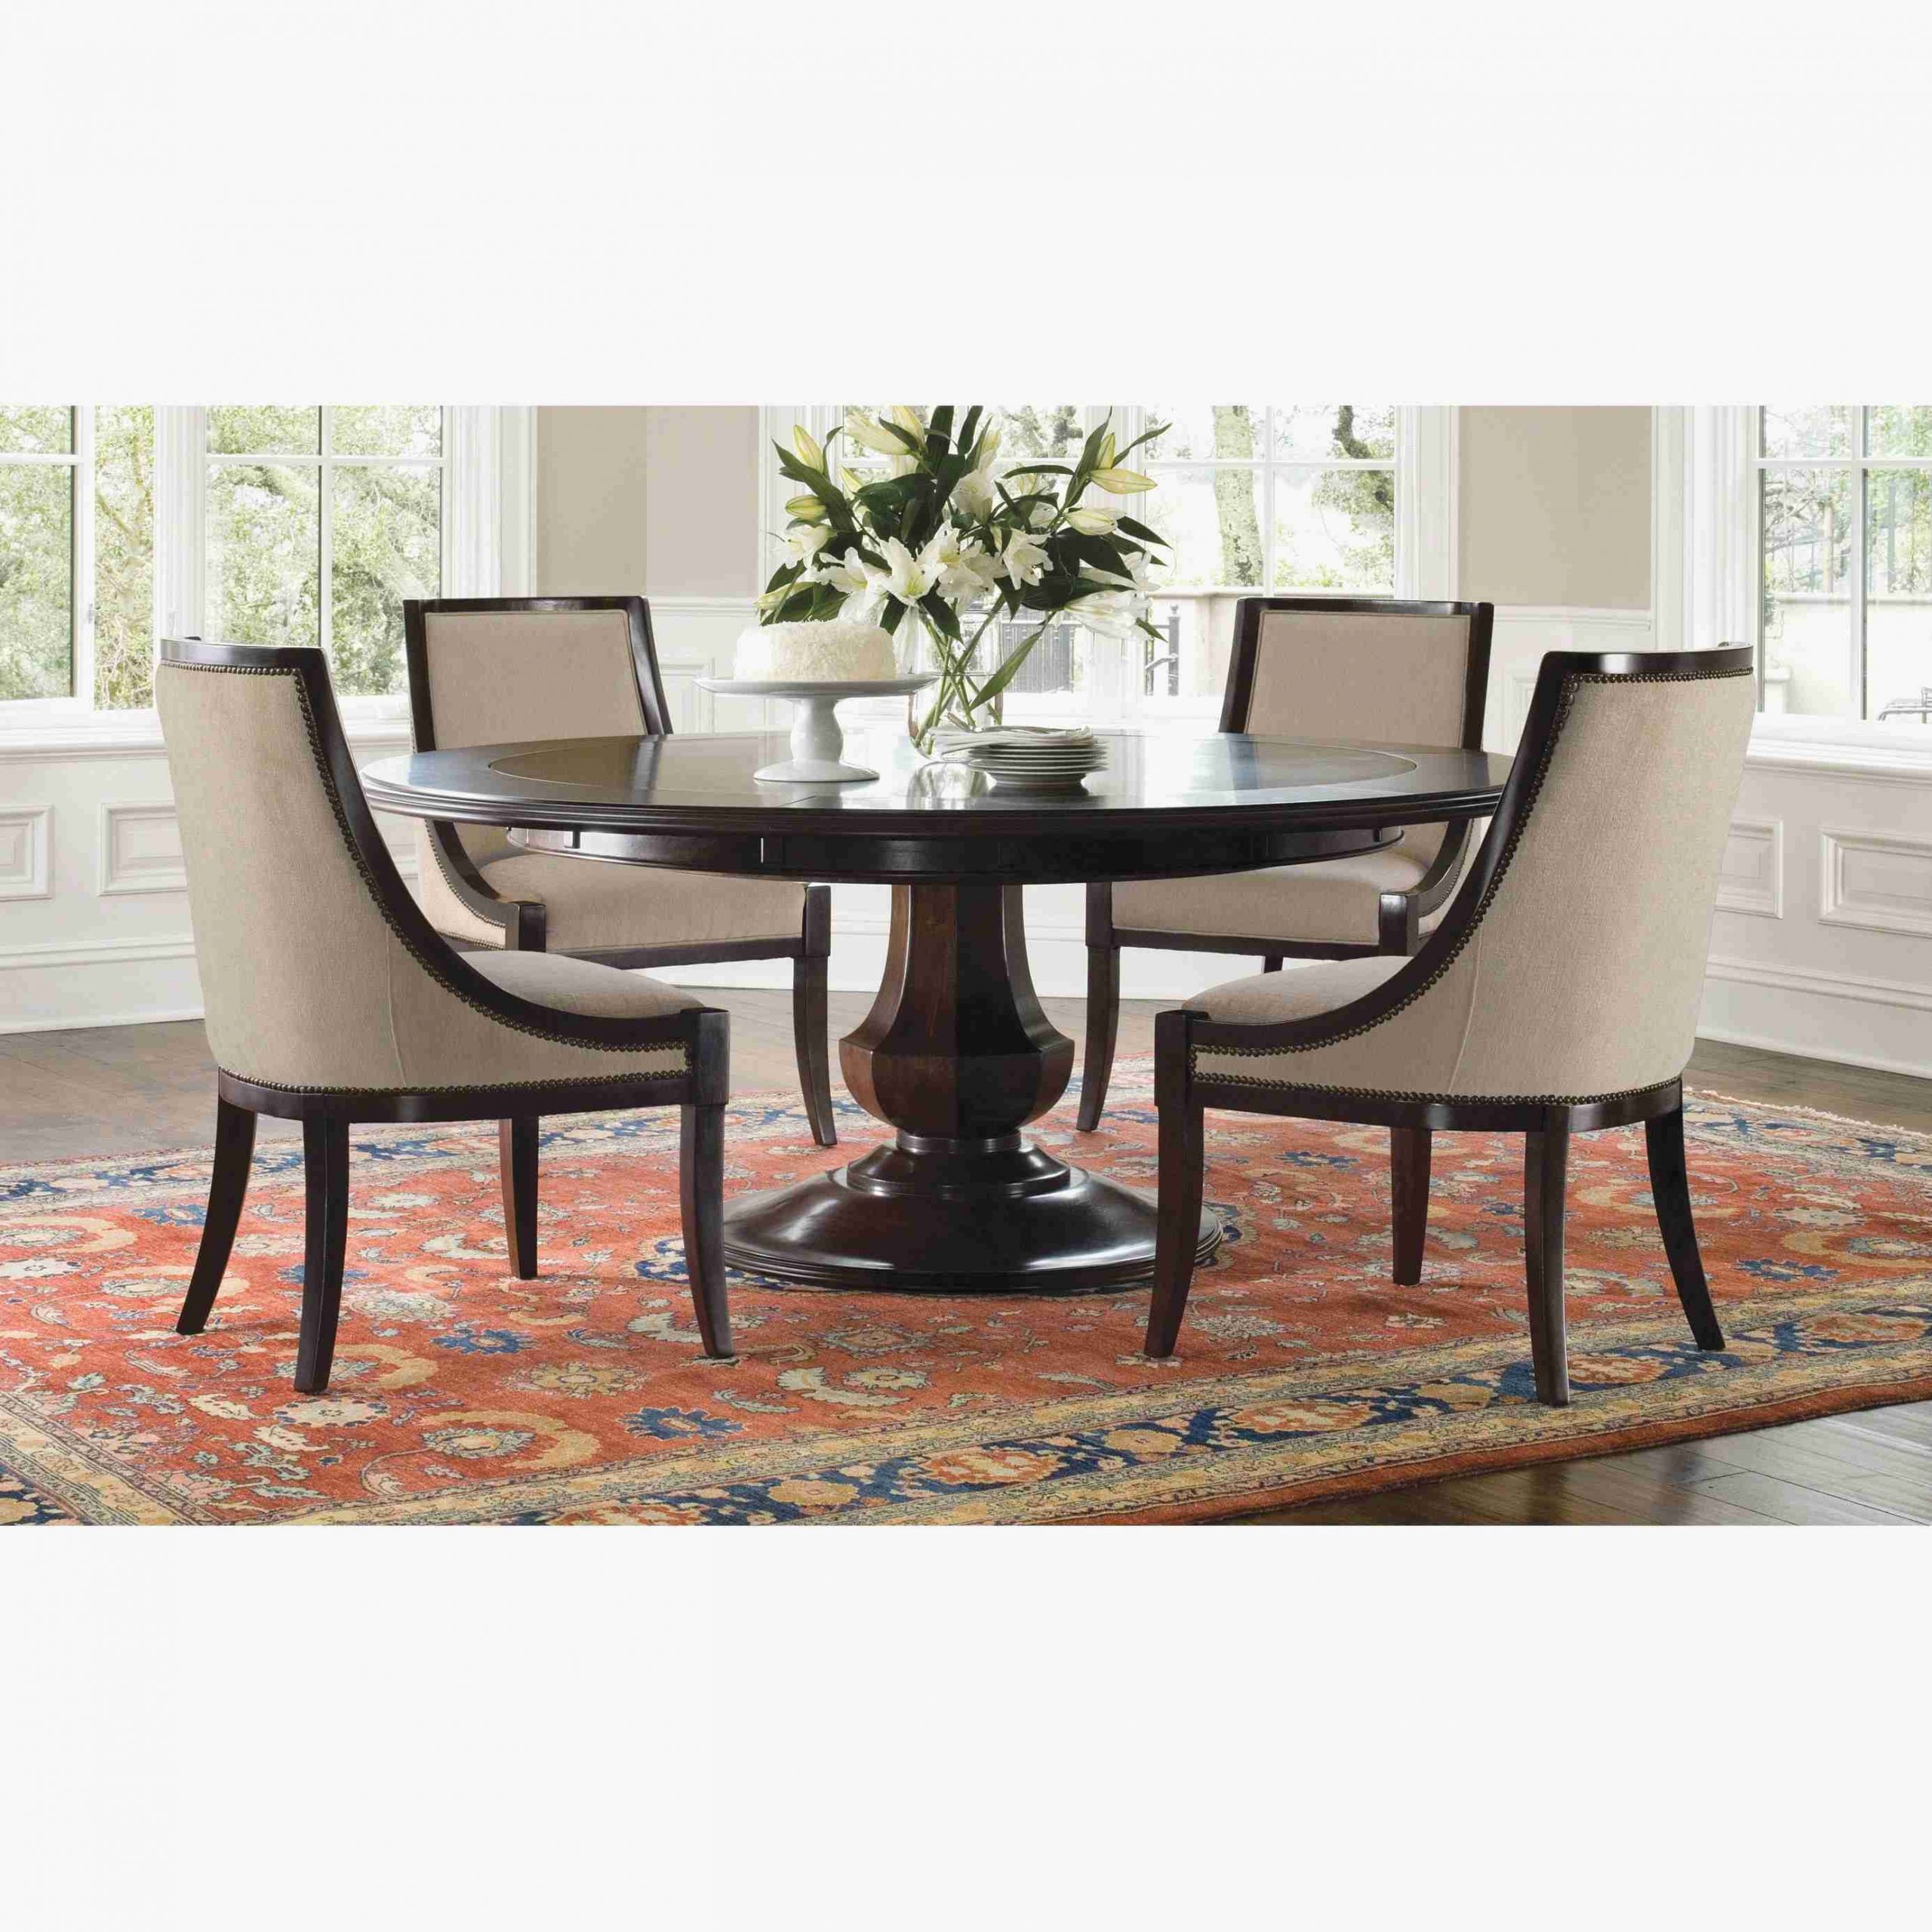 New Jcpenney Furniture Dining Room Sets for Simple Design